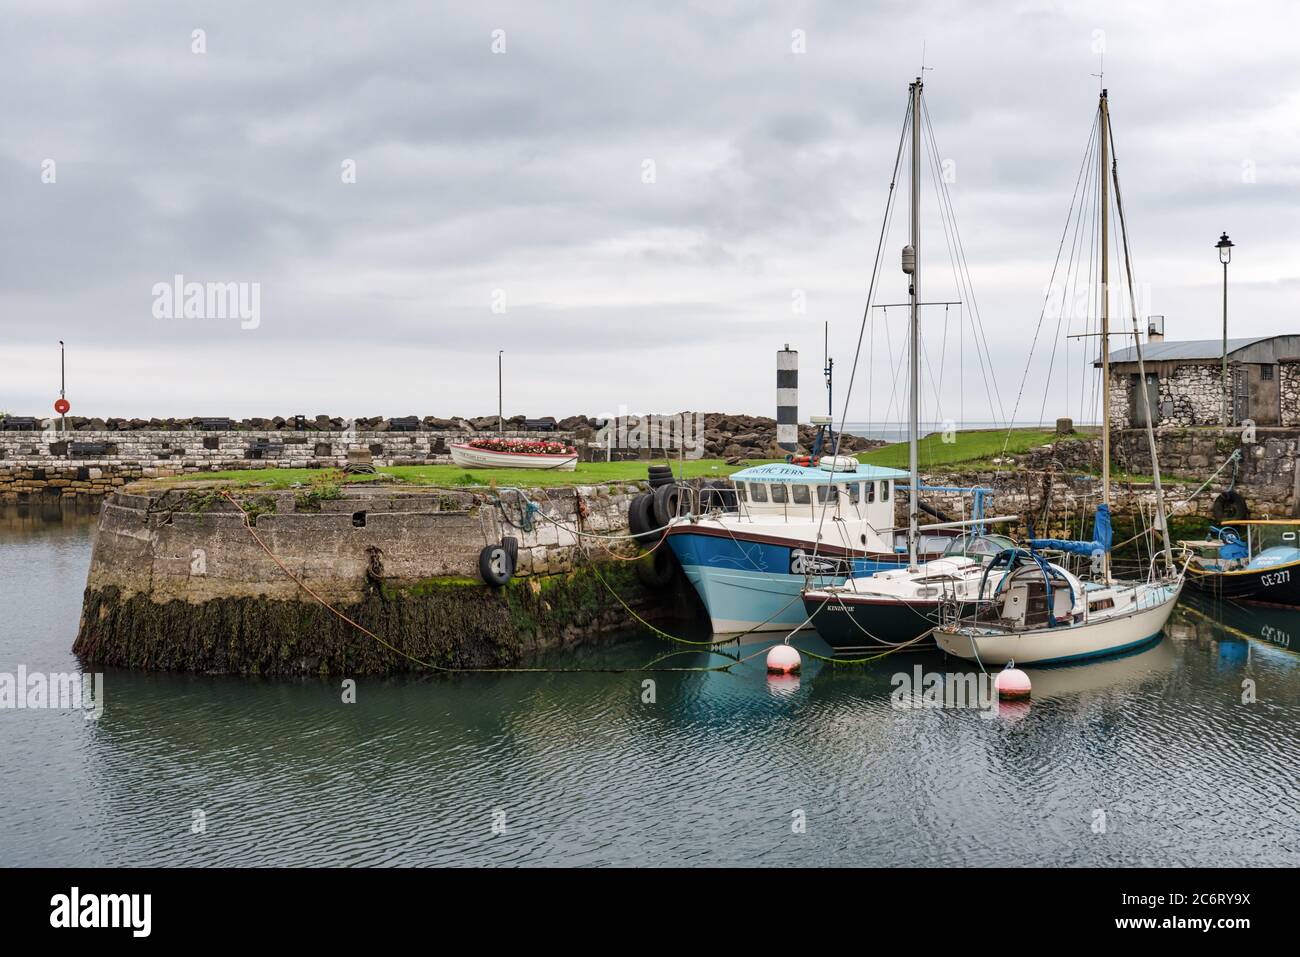 Carnlough, Northern Ireland- July 4, 2020: Fishing boats in Carnlough Harbor on the Antrim Coast in Northern Ireland Stock Photo